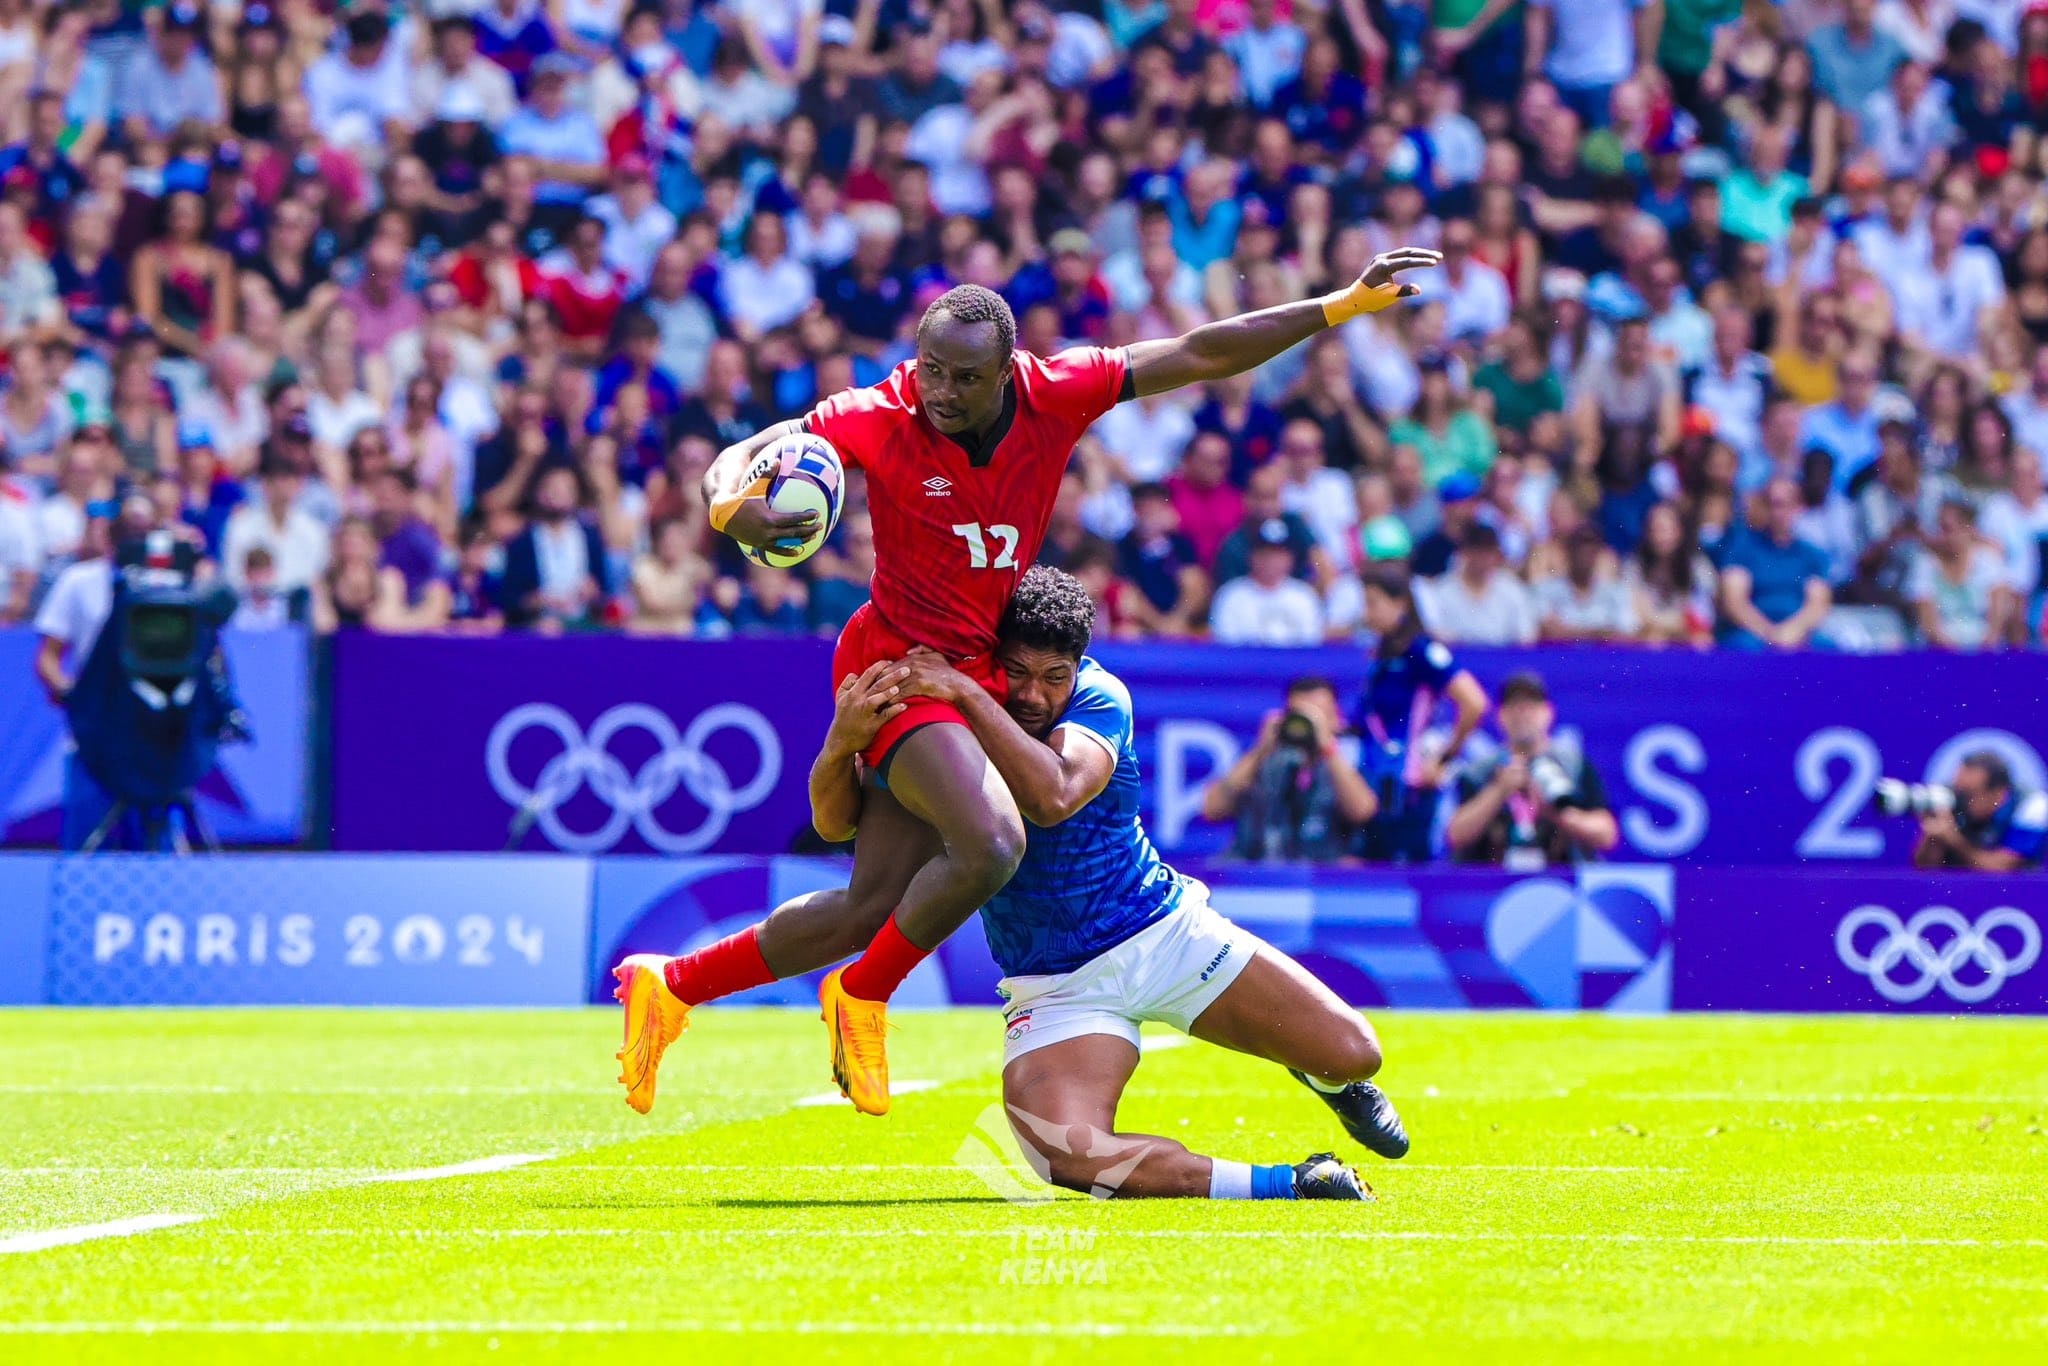 PARIS 2024: Kenya relegated to 9th-12th play-off following heavy loss against Samoa